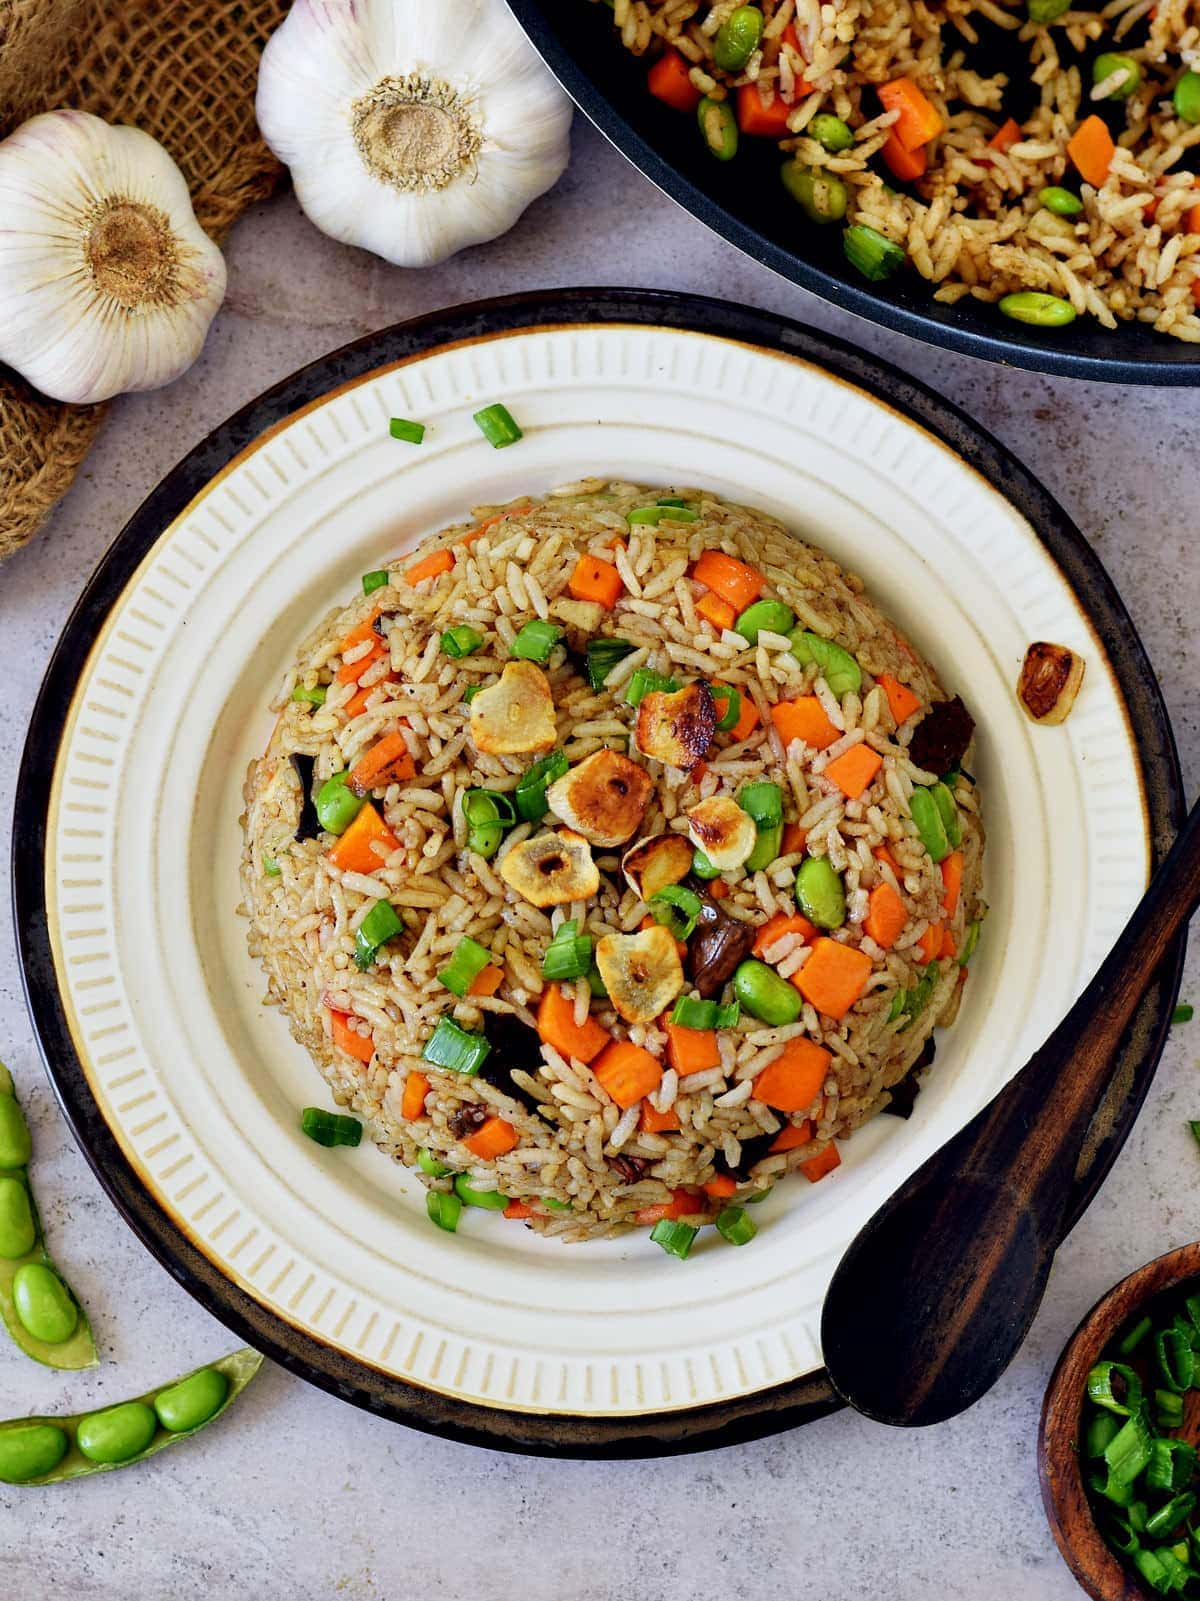 Japanese fried rice with veggies and garlic on plate